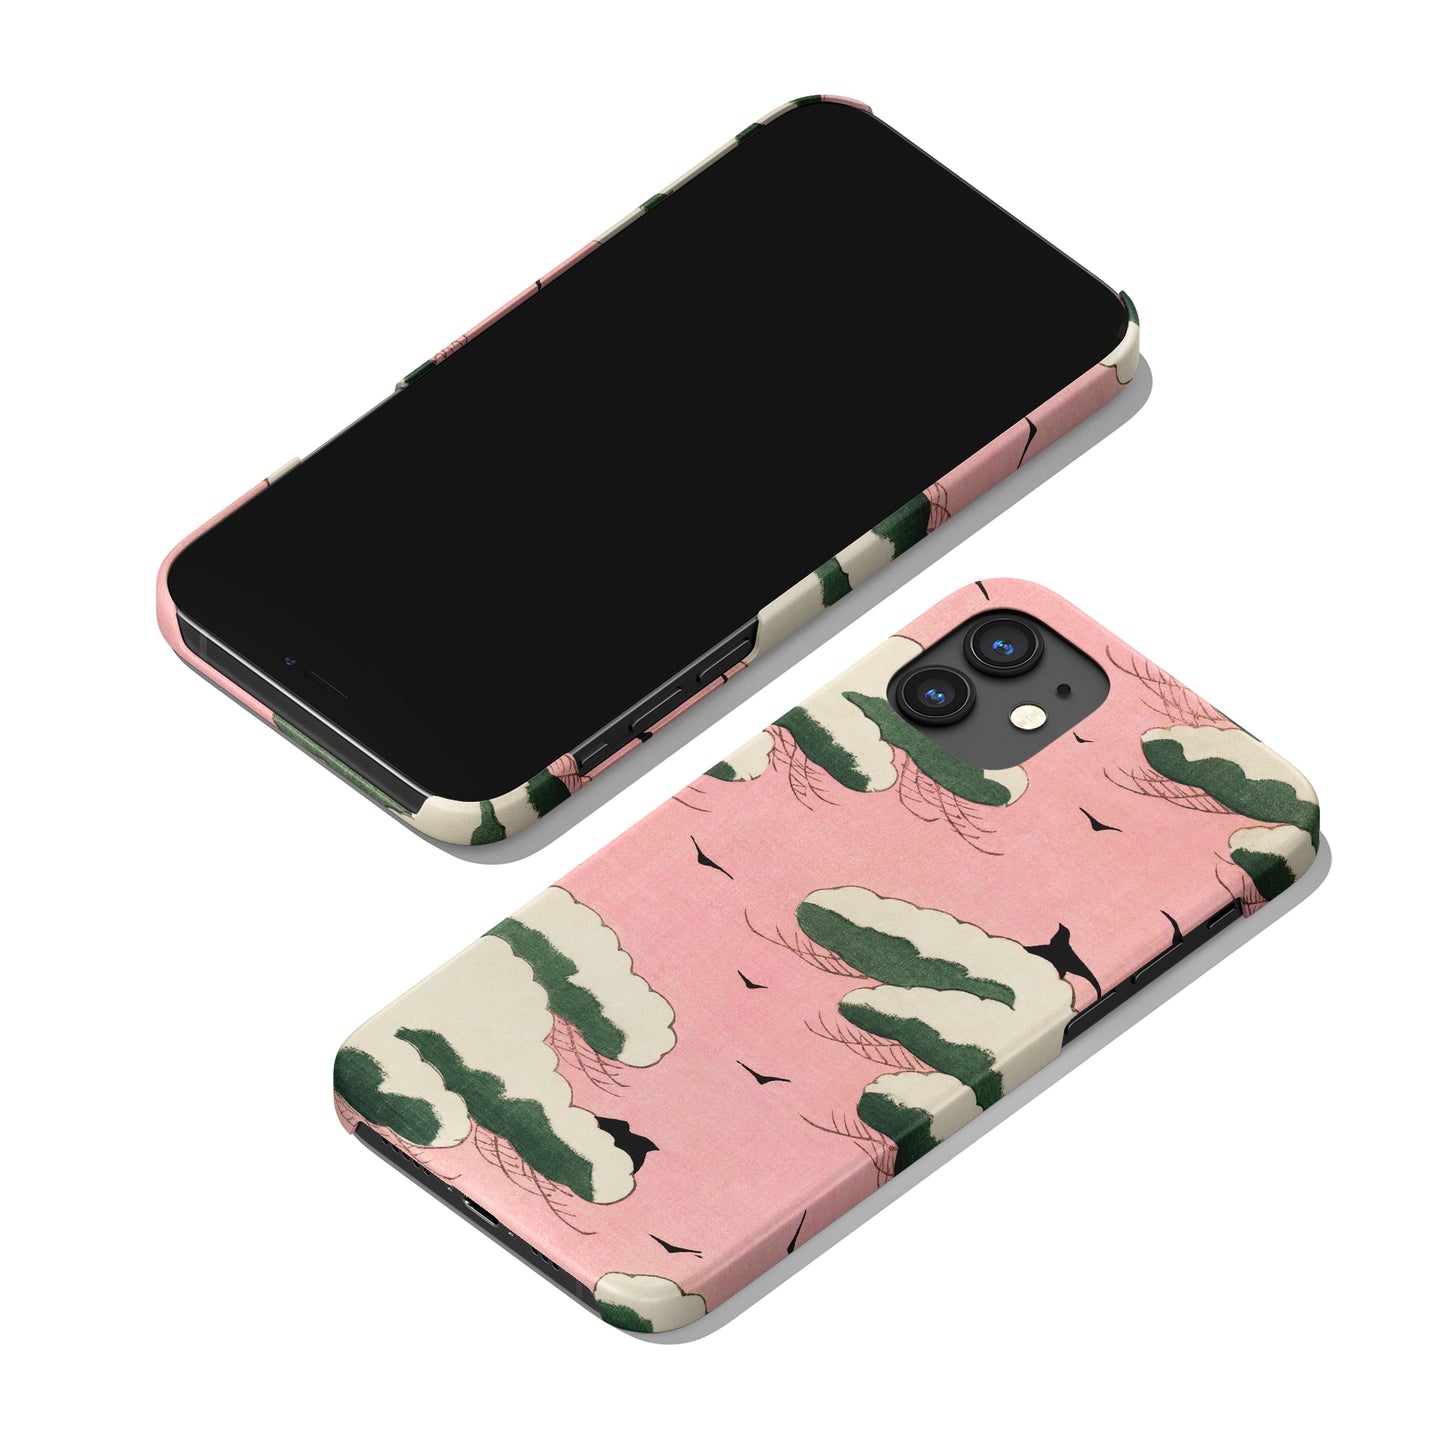 iPhone Case with Japanese Woodcut Print - Pink Sky